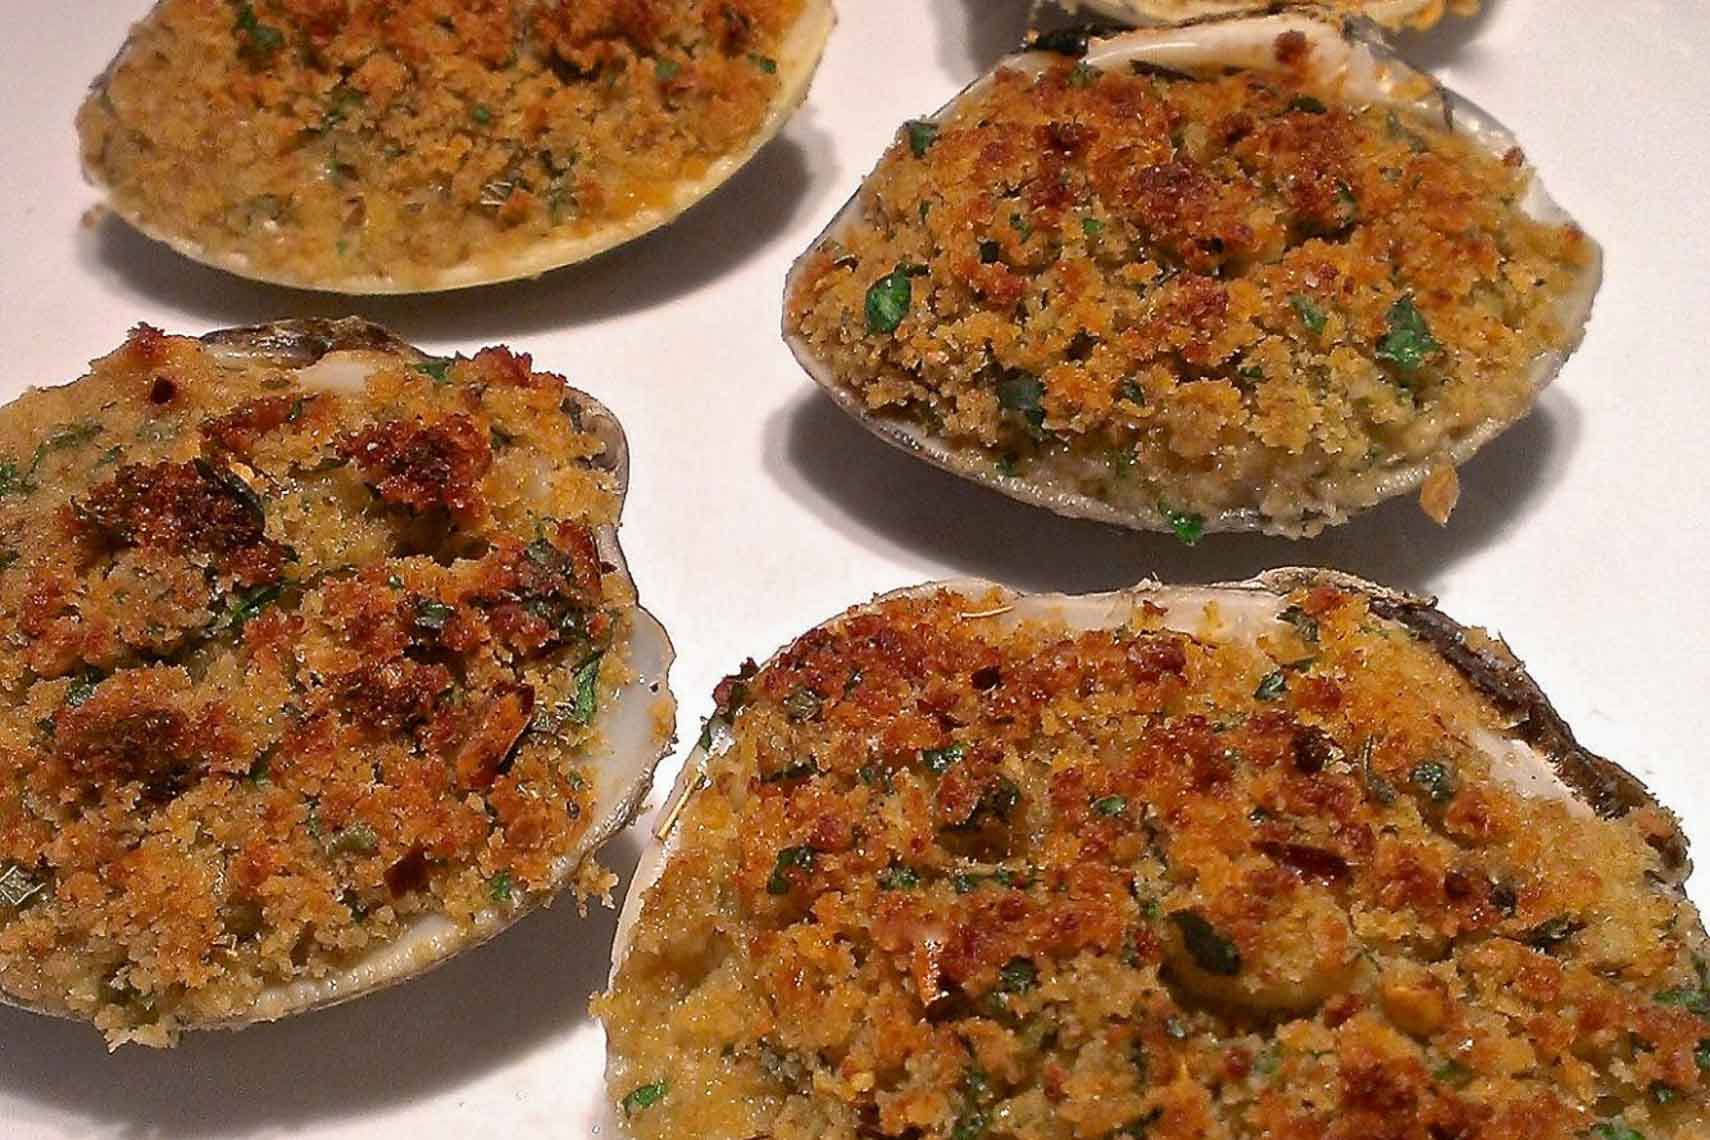 Frozen stuffed clams in air fryer - The Top Meal